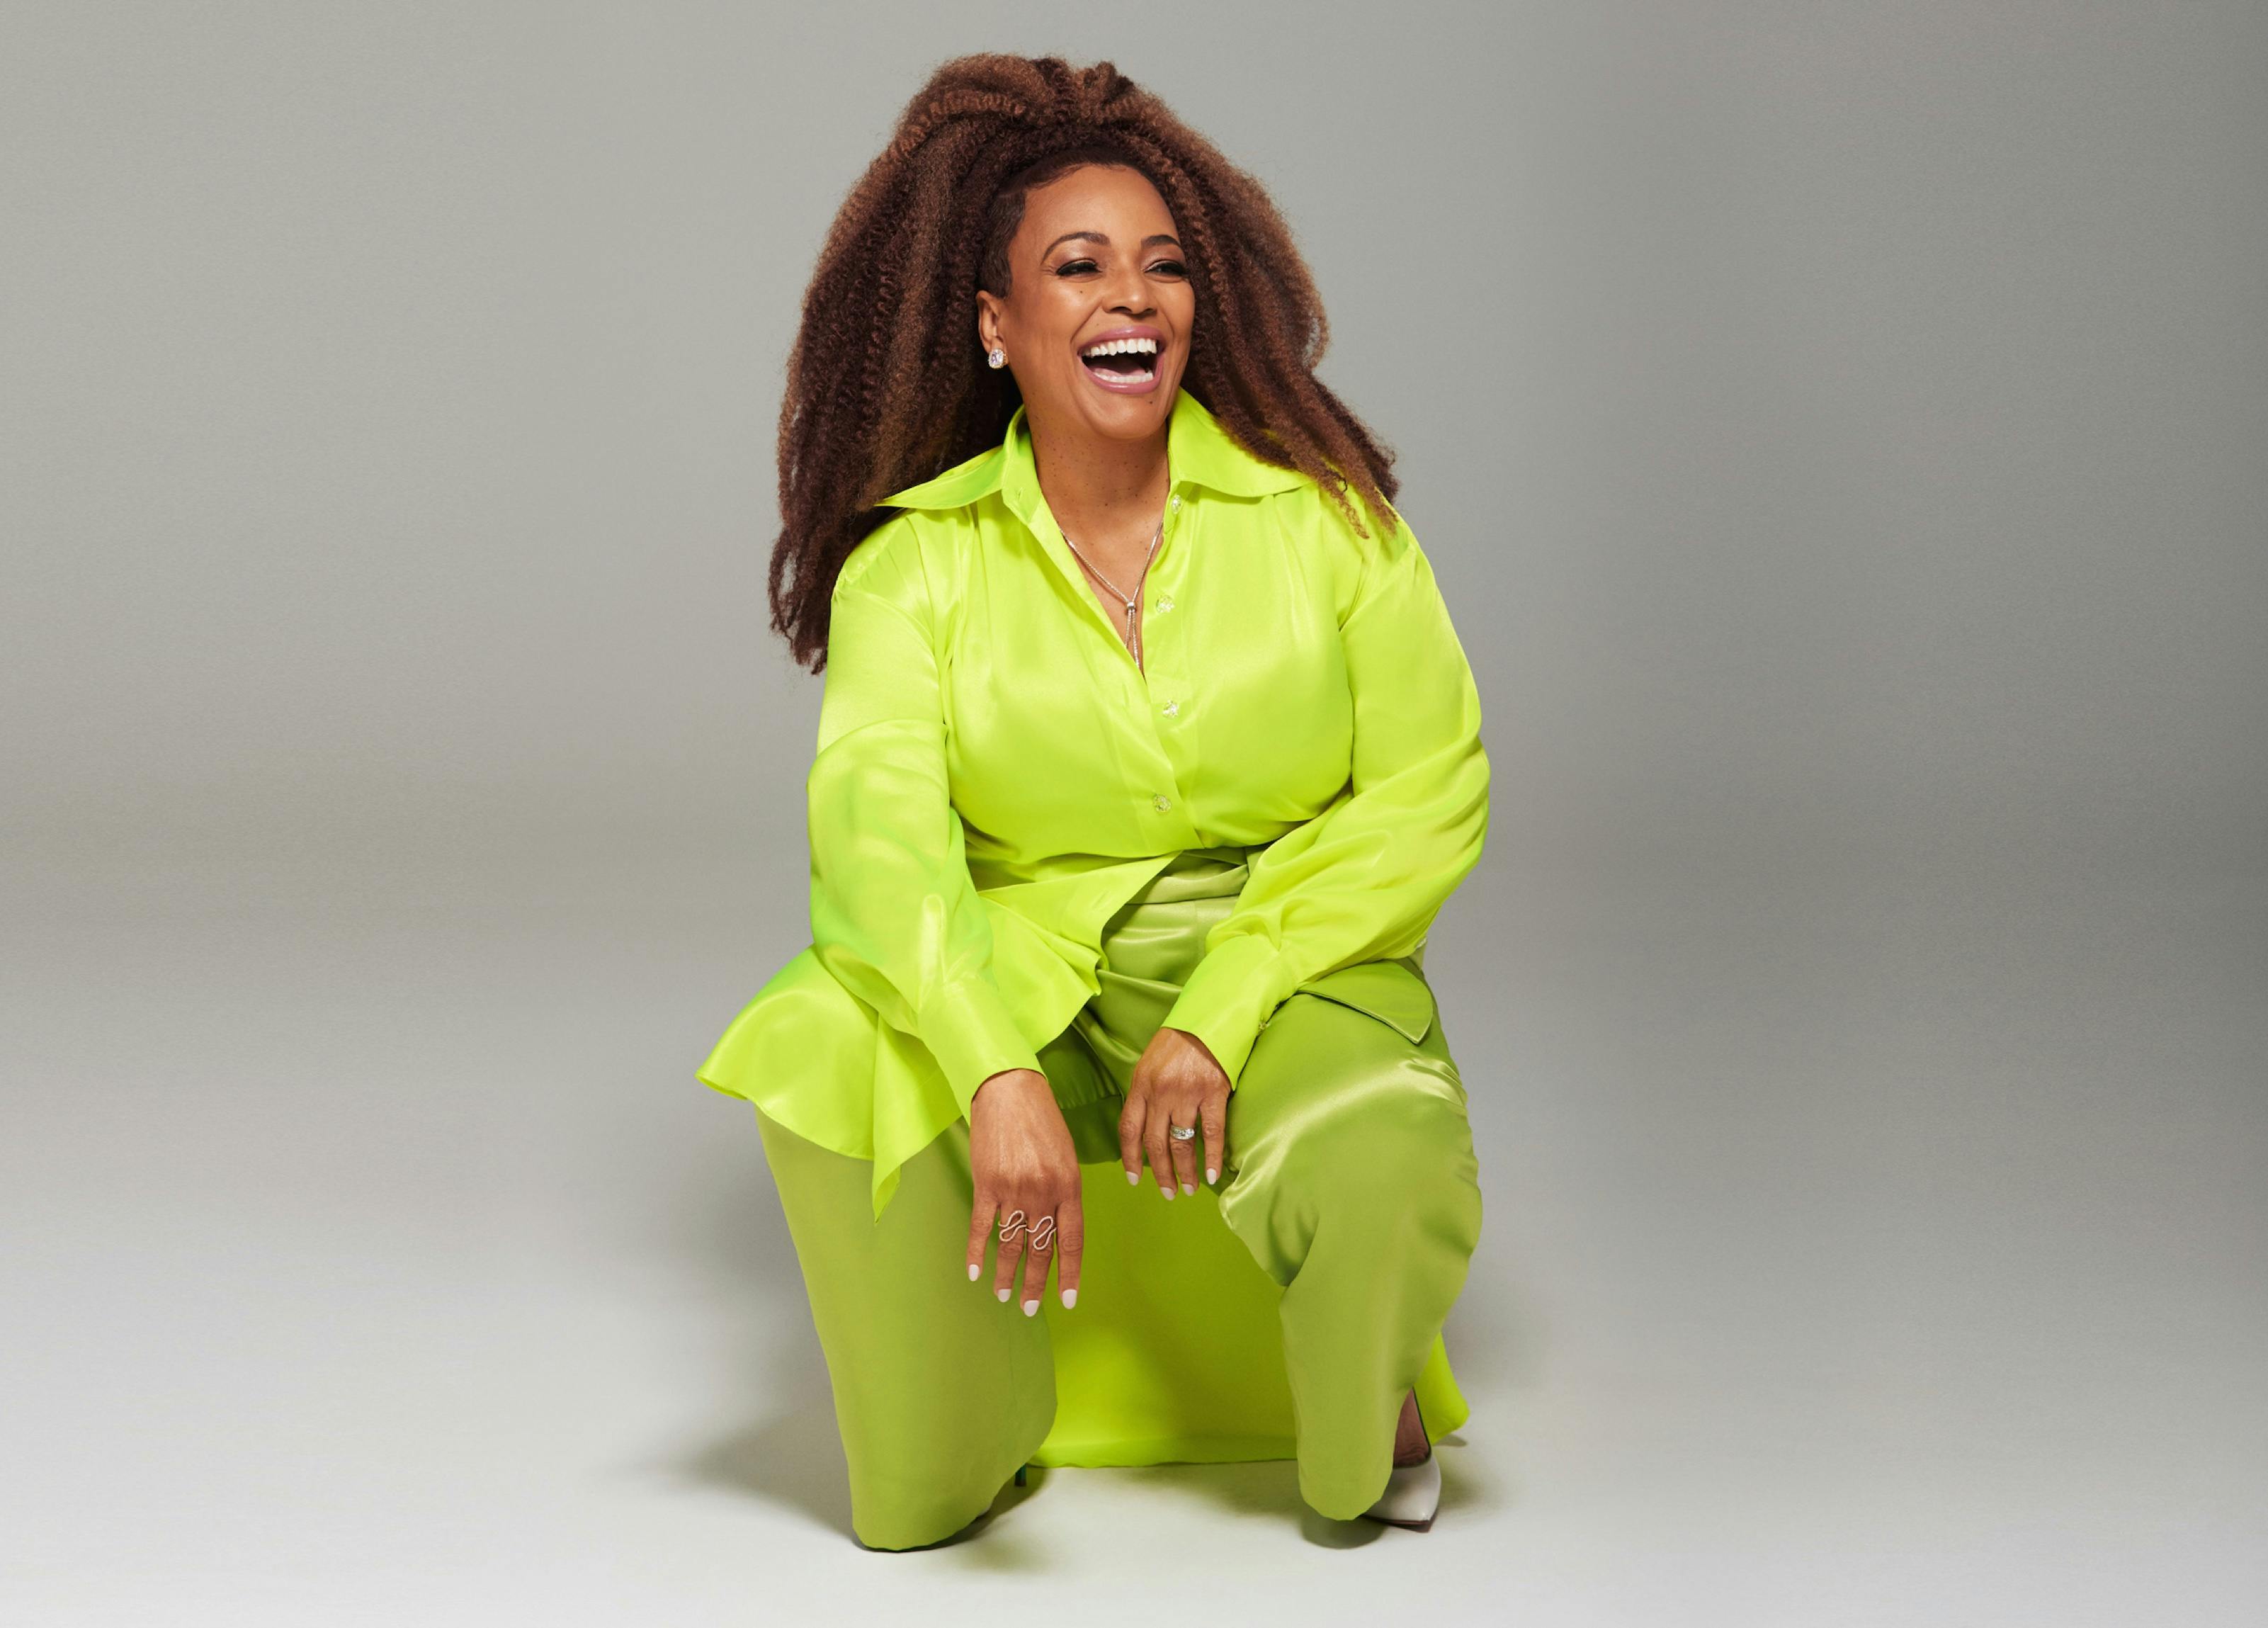 Kim Fields wears a bright green neon suit the color of a tennis ball. Her hair is long and her smile huge — she laughs at something off screen. Her hands glitter with jewelry. 